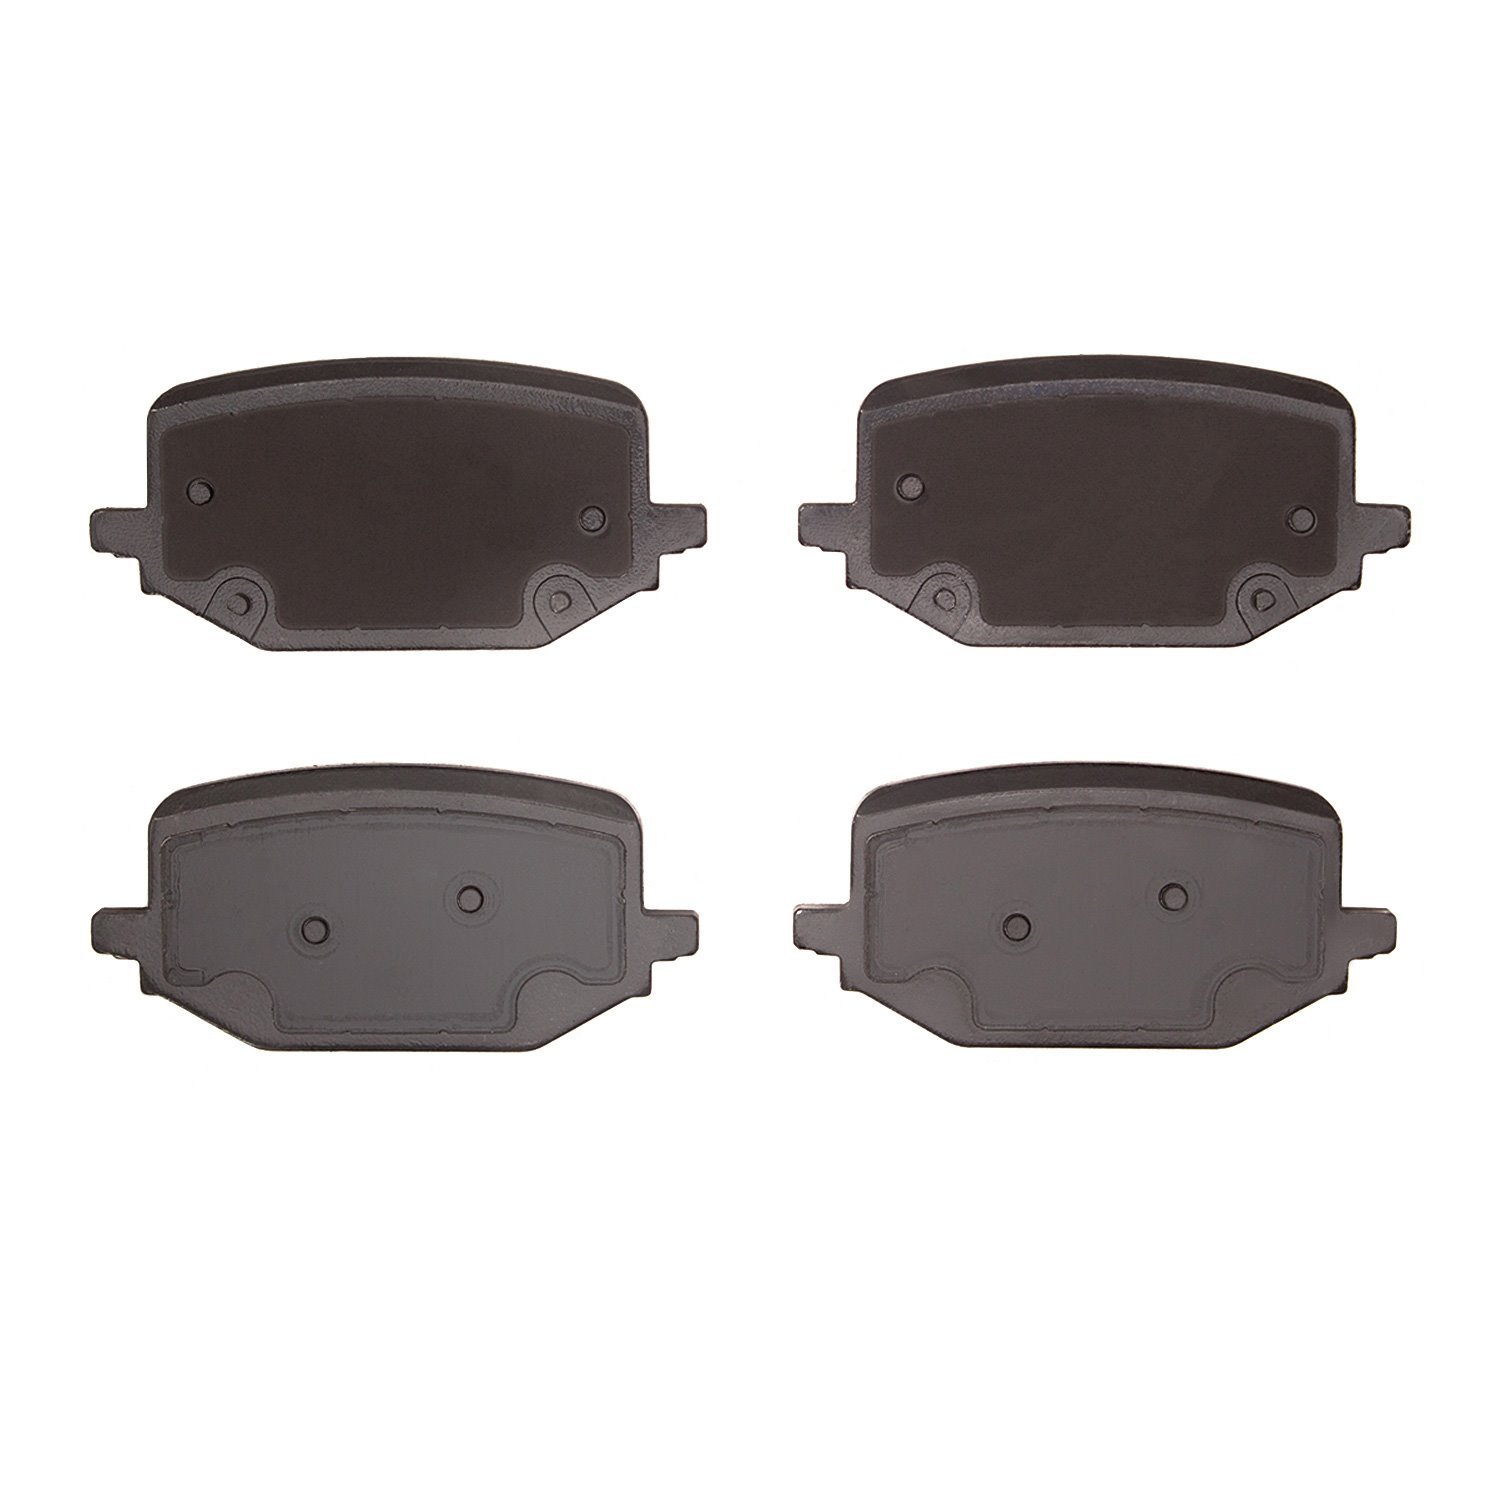 1551-2231-00 5000 Advanced Ceramic Brake Pads, Fits Select Ford/Lincoln/Mercury/Mazda, Position: Rear